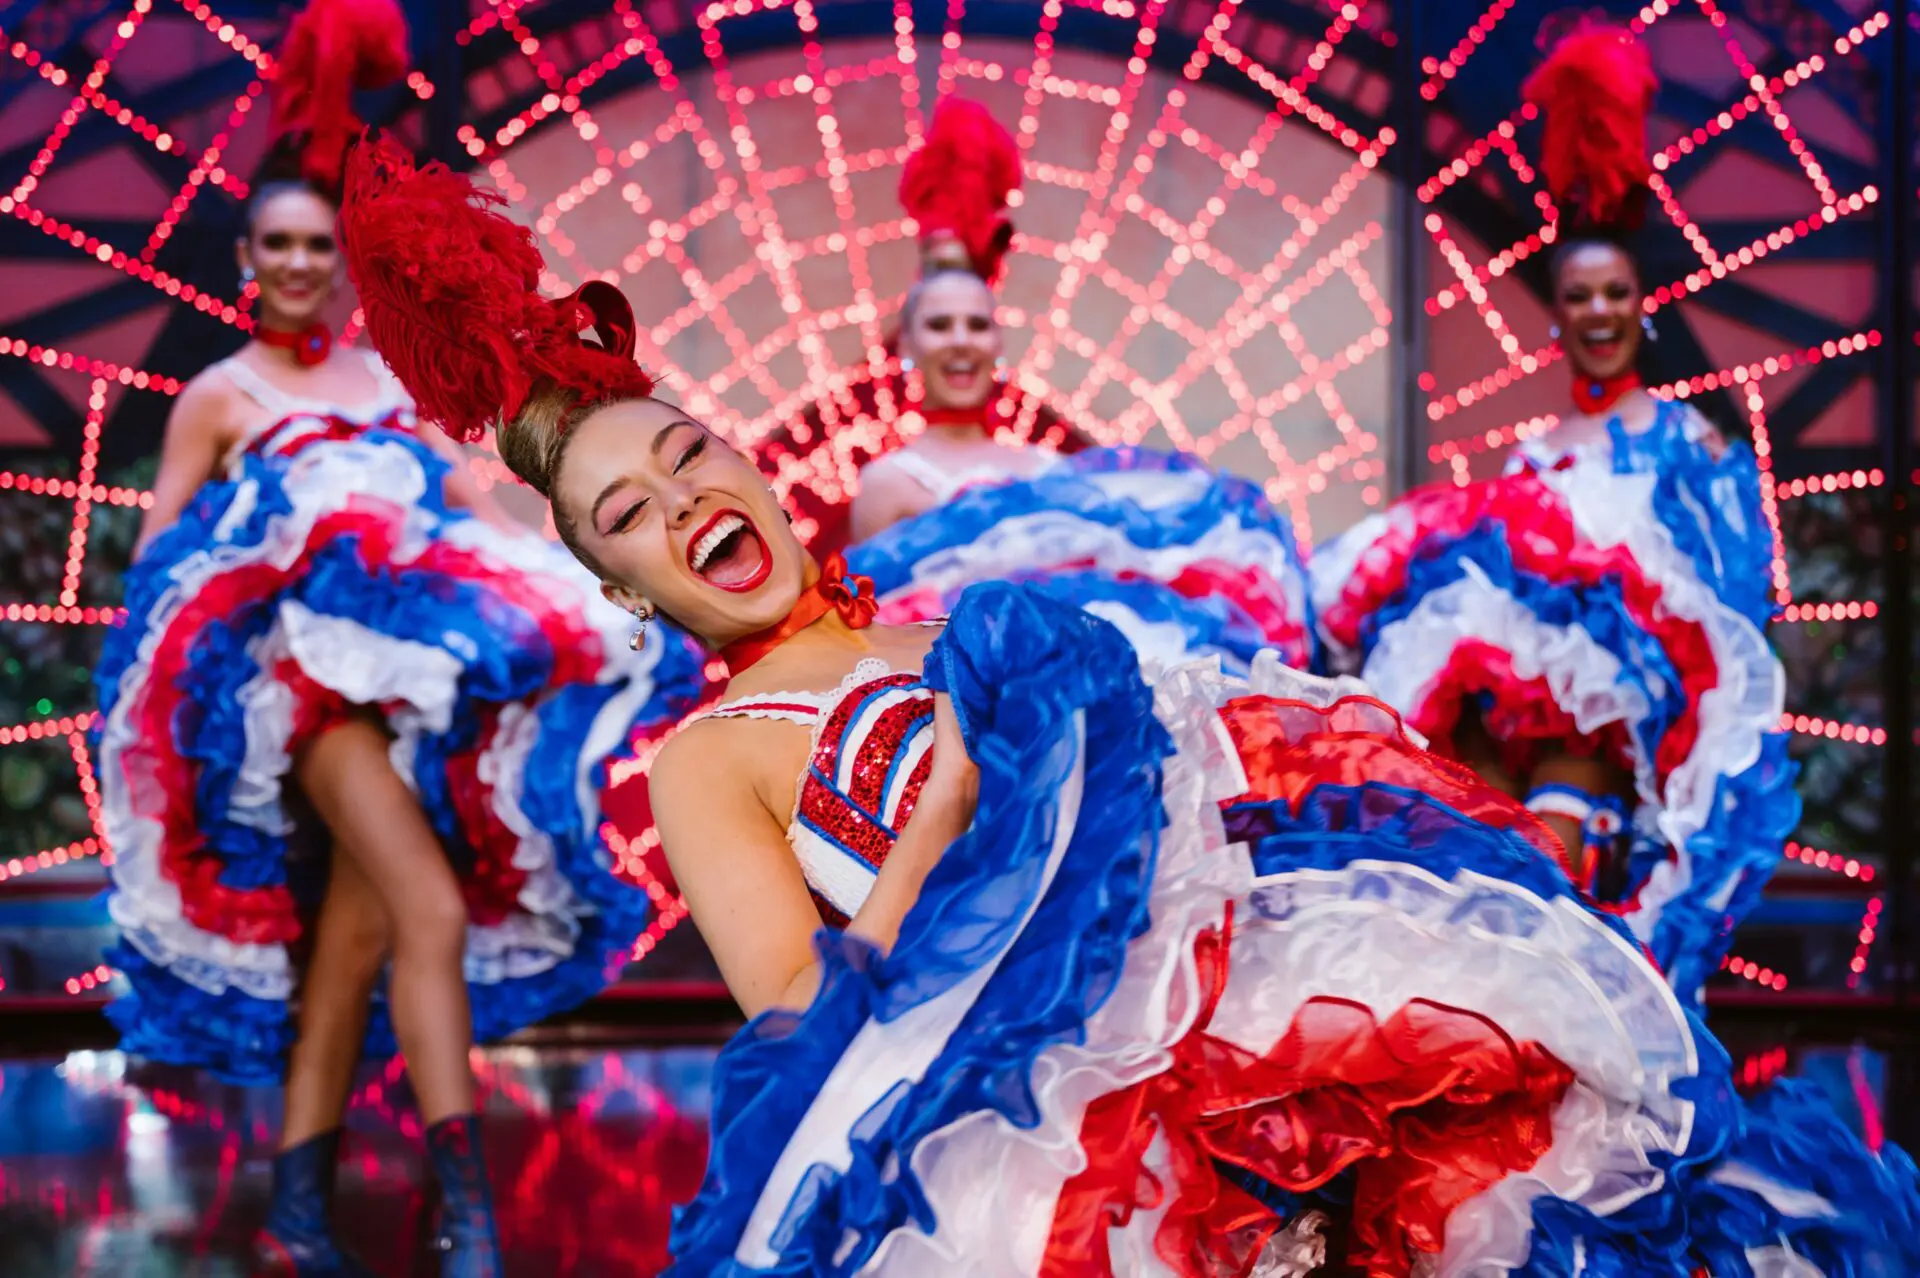 Cancan dancers performing on stage